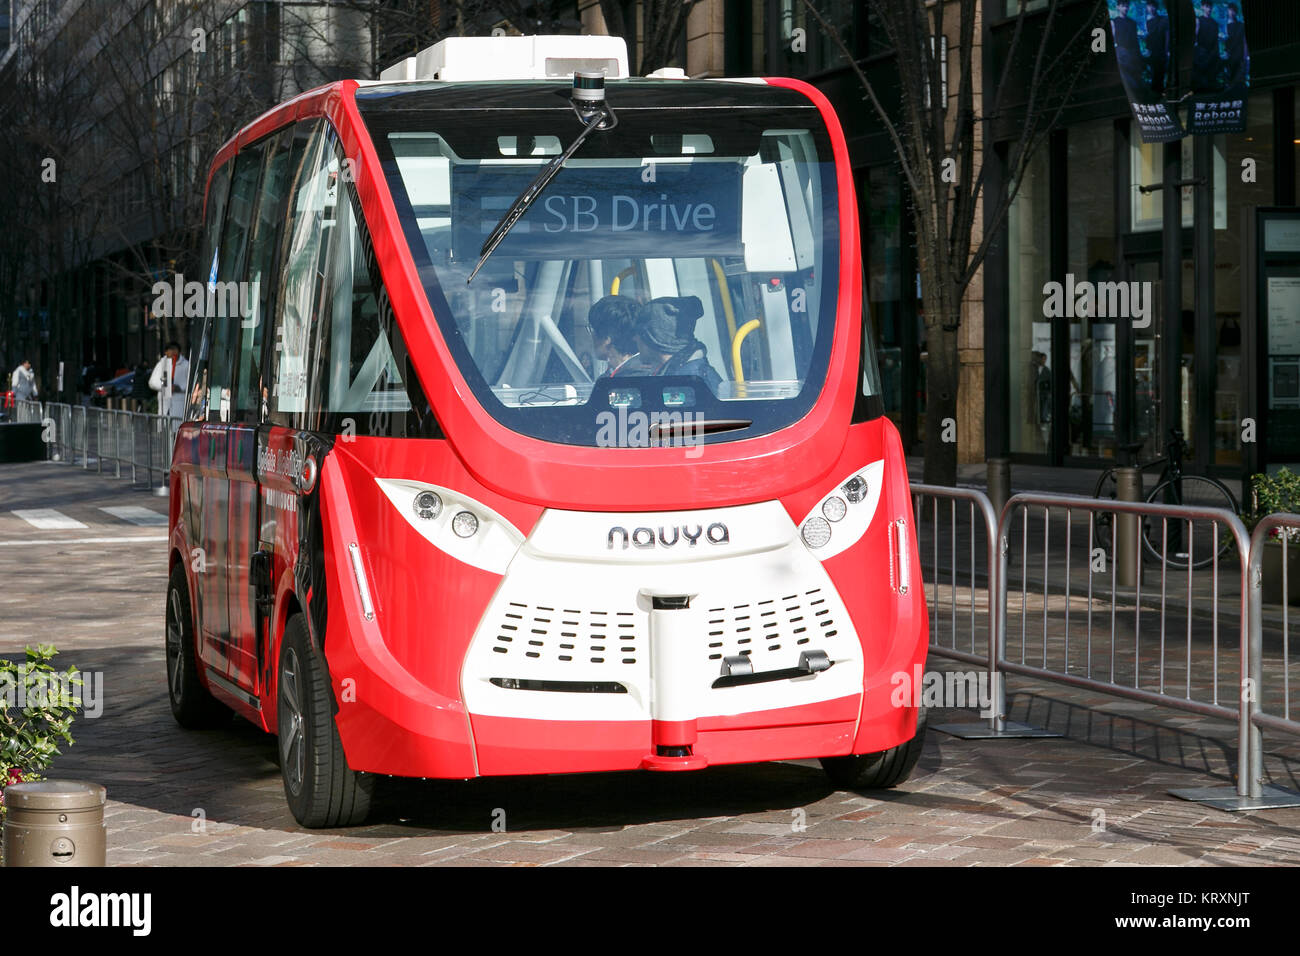 Tokyo, Japan. 22nd Dec, 2017. A self-driving electric shuttle bus Navya Arma is introduced at a press event on December 22, 2017, Tokyo, Japan. The driverless French electric vehicle (EV) developed by Navya Technologies SAS can carry up to 15 passengers and reach 45kmh. Japan's telecom giant SoftBank's subsidiary SB Drive and Mitsubishi Estate Co., Ltd. collaborated on the vehicle, and Japanese government is aiming to promote the autonomous driving technology ahead of the Tokyo 2020 Olympics. Credit: Rodrigo Reyes Marin/AFLO/Alamy Live News Stock Photo